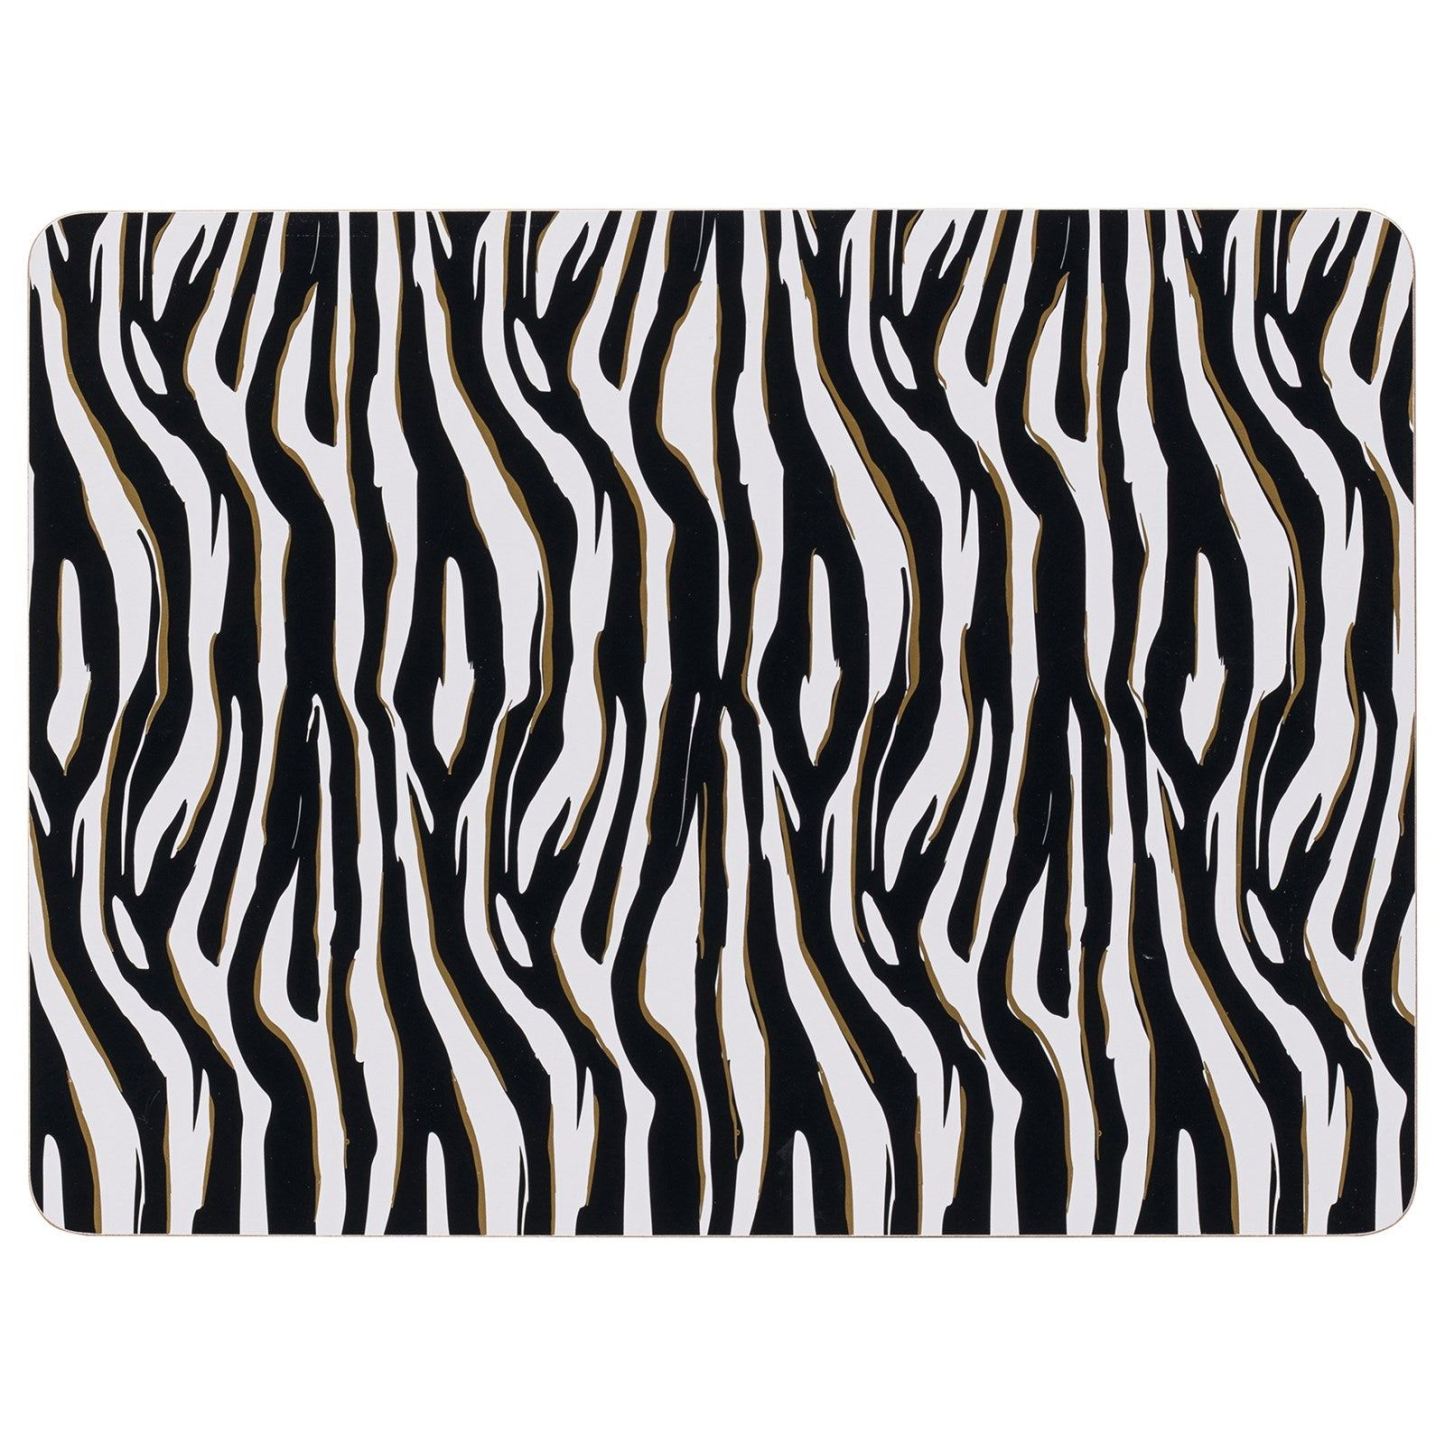 Looking Wild Looking Wild Set of 4 Placemats